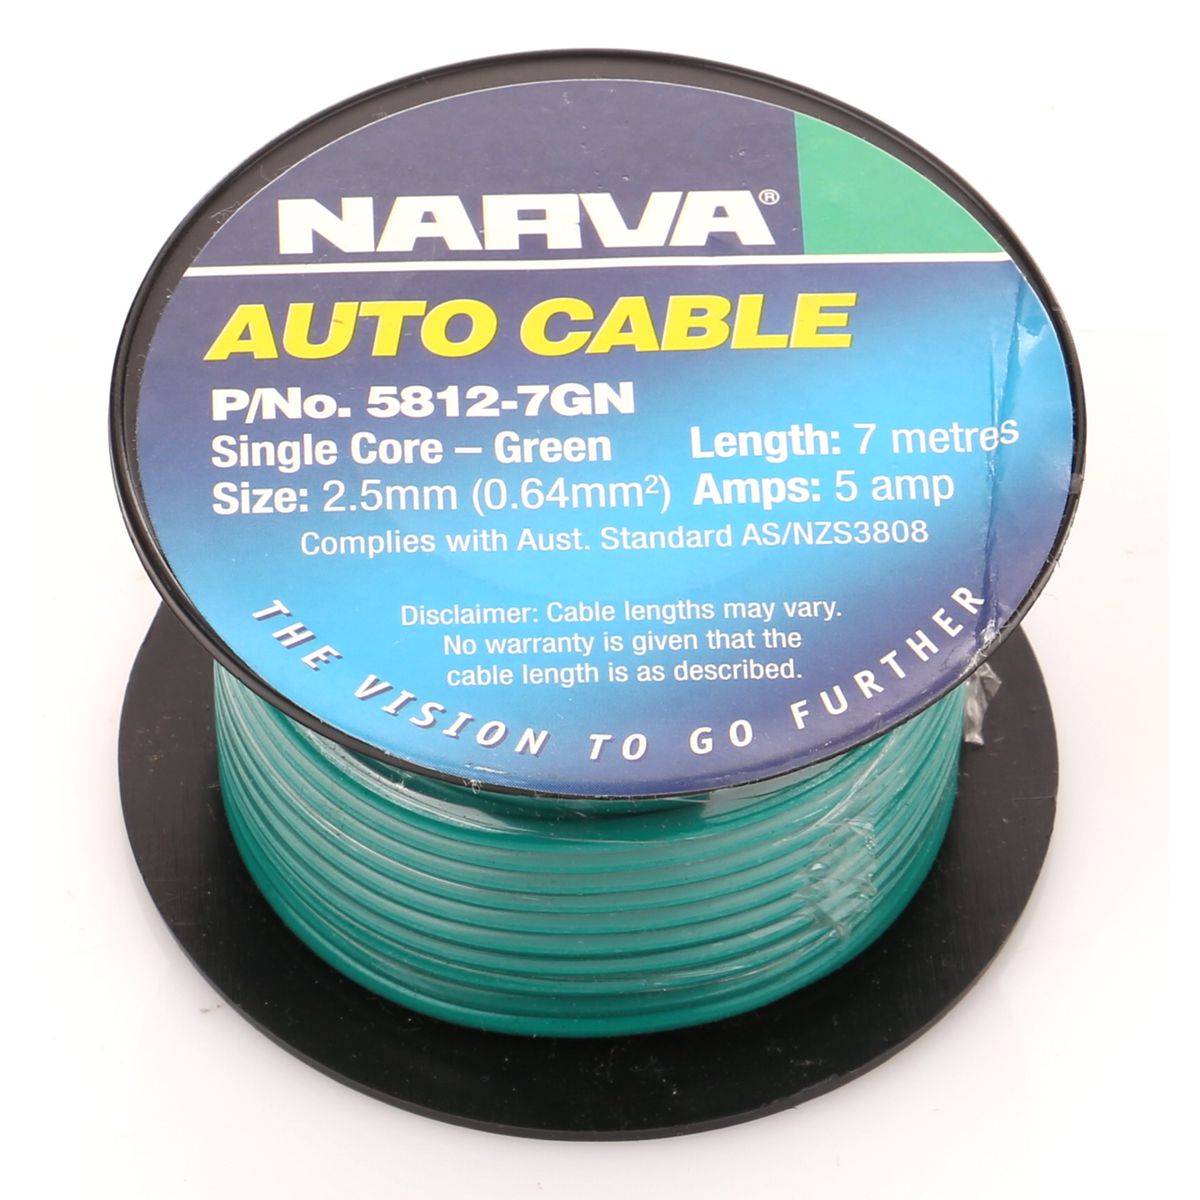 5A 2.5mm Green Single Core Cable (7m) - Narva | Universal Auto Spares